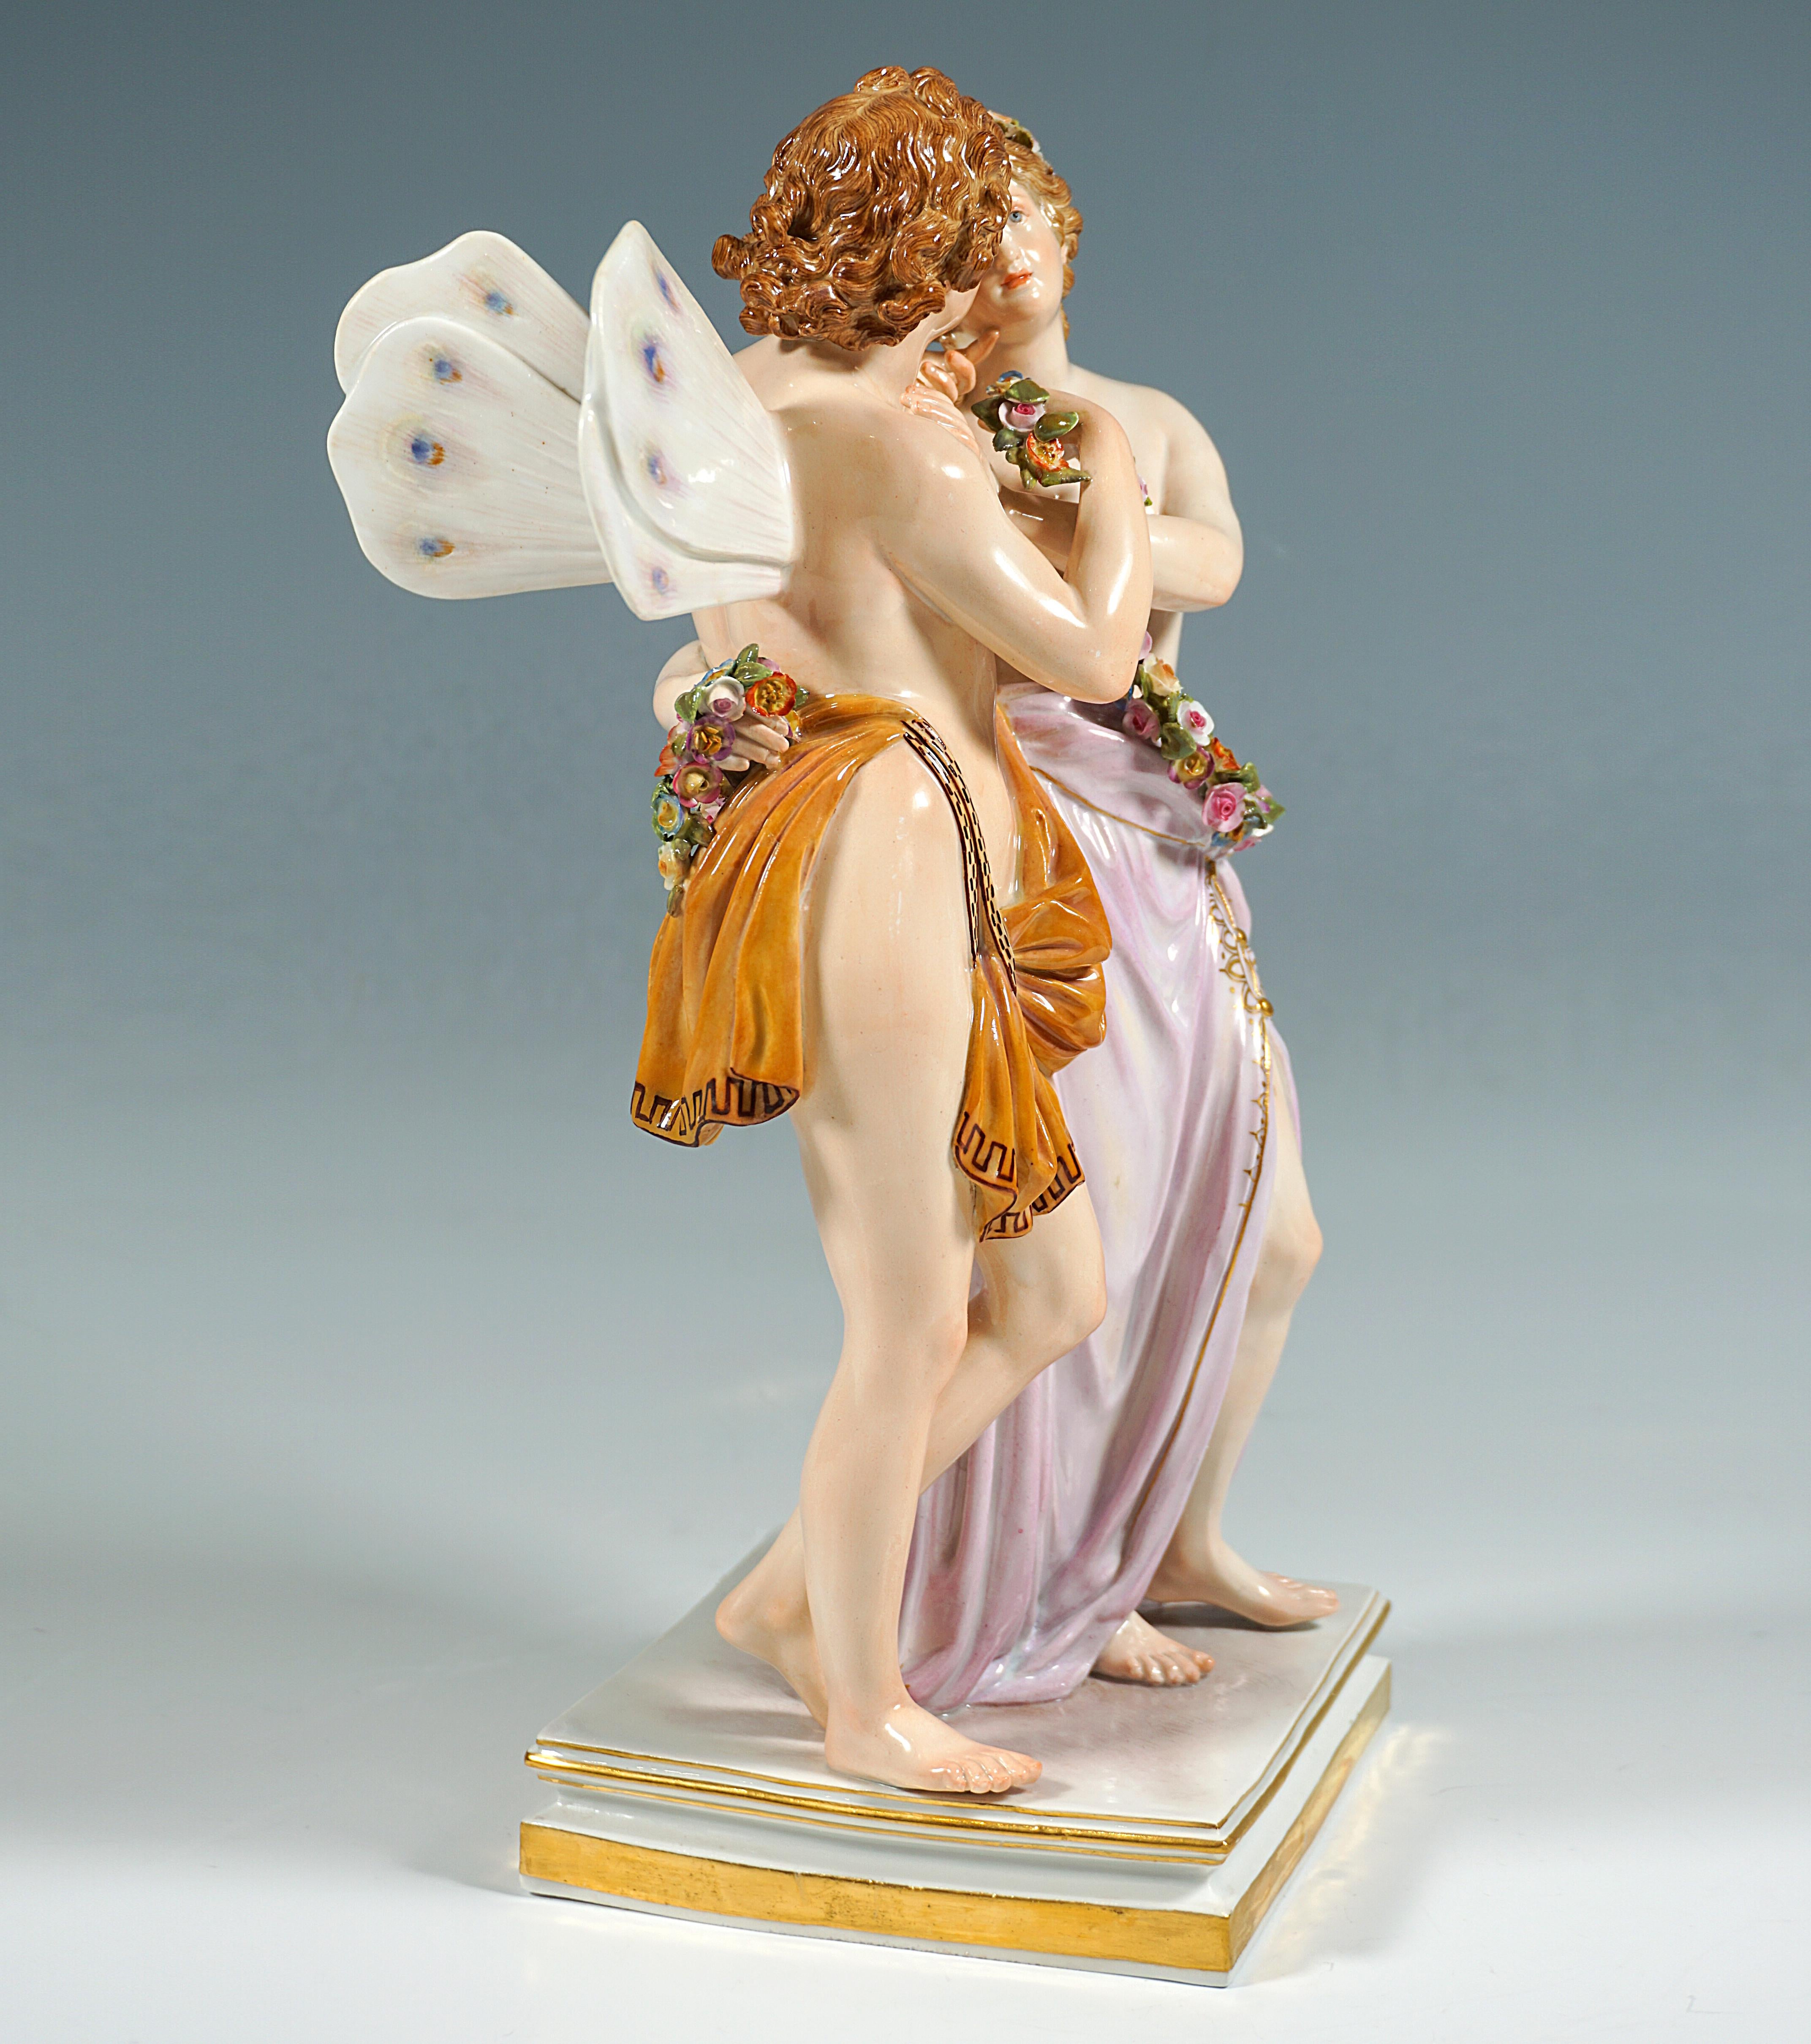 Excellent large and rare Meissen figurine group from the 19th century:
The winged Zephyr, the gentle wind god, and Flora, goddess of vegetation and blossom, loosely wrapped in cloths, standing side by side, Flora placing a long garland of blossoms